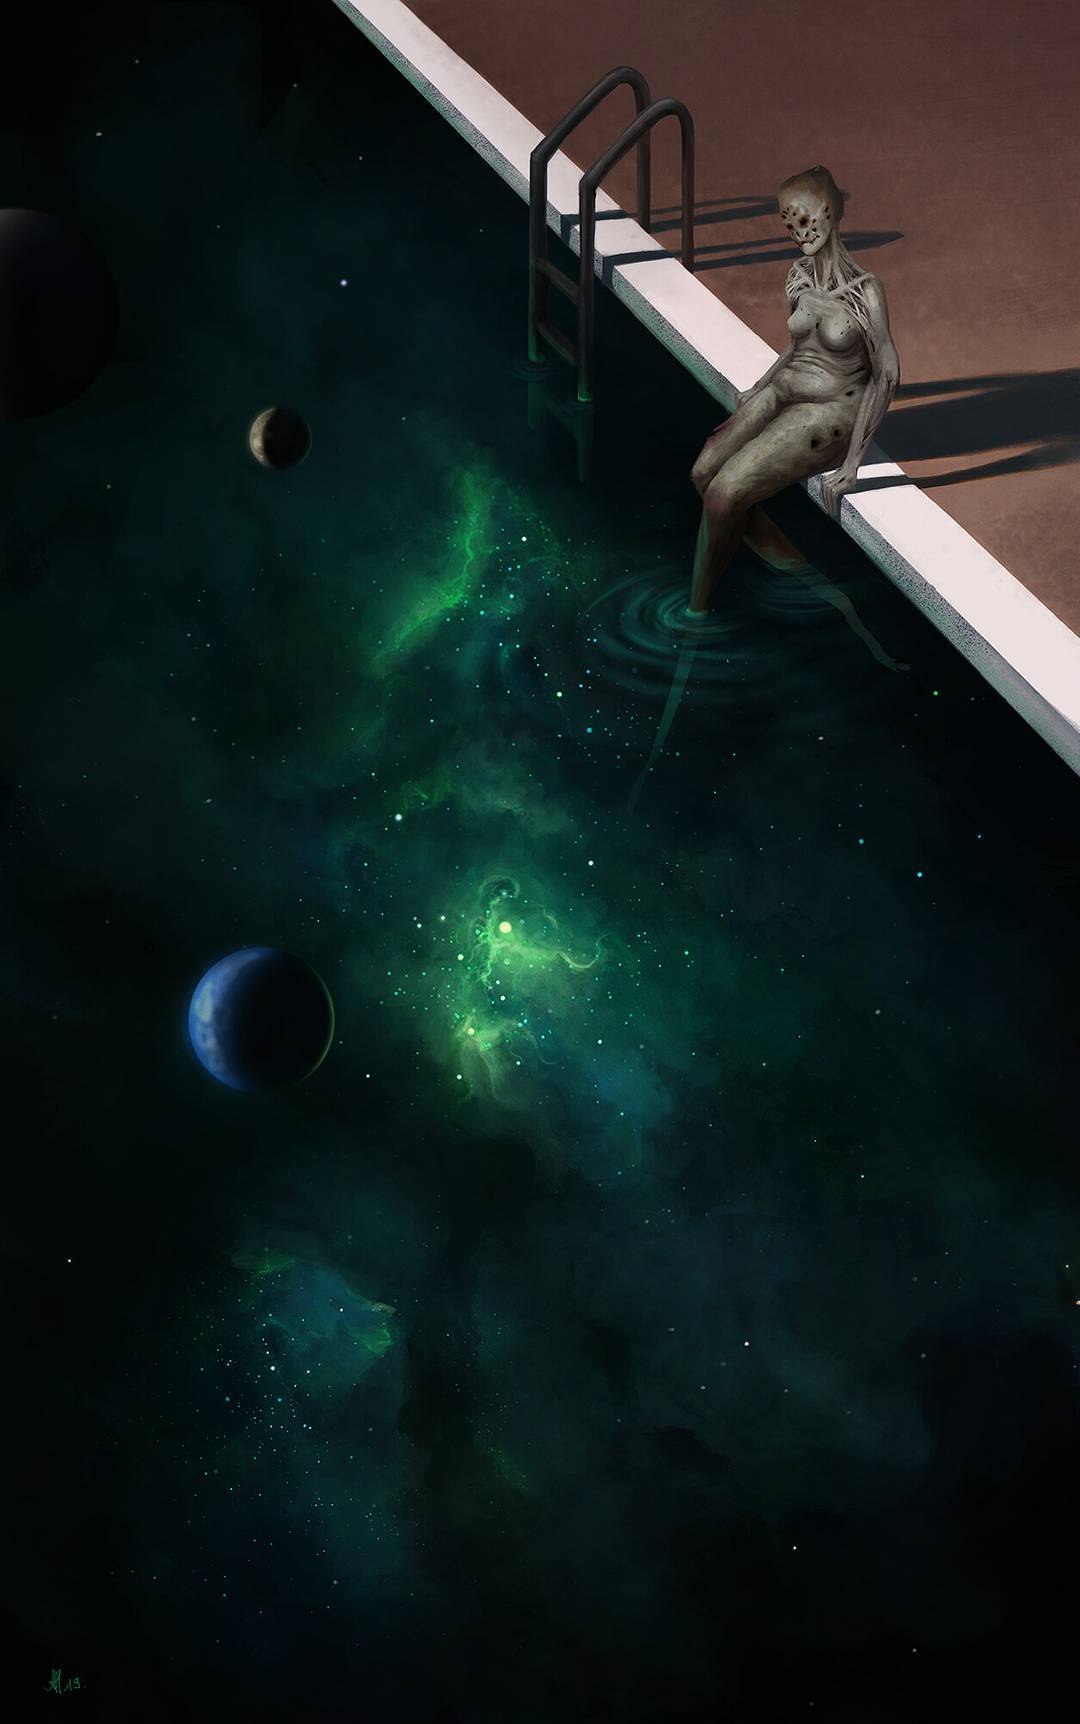 space-pool-by-m-lissa-houpert-6r07bewxwy-1080x1724.jpg